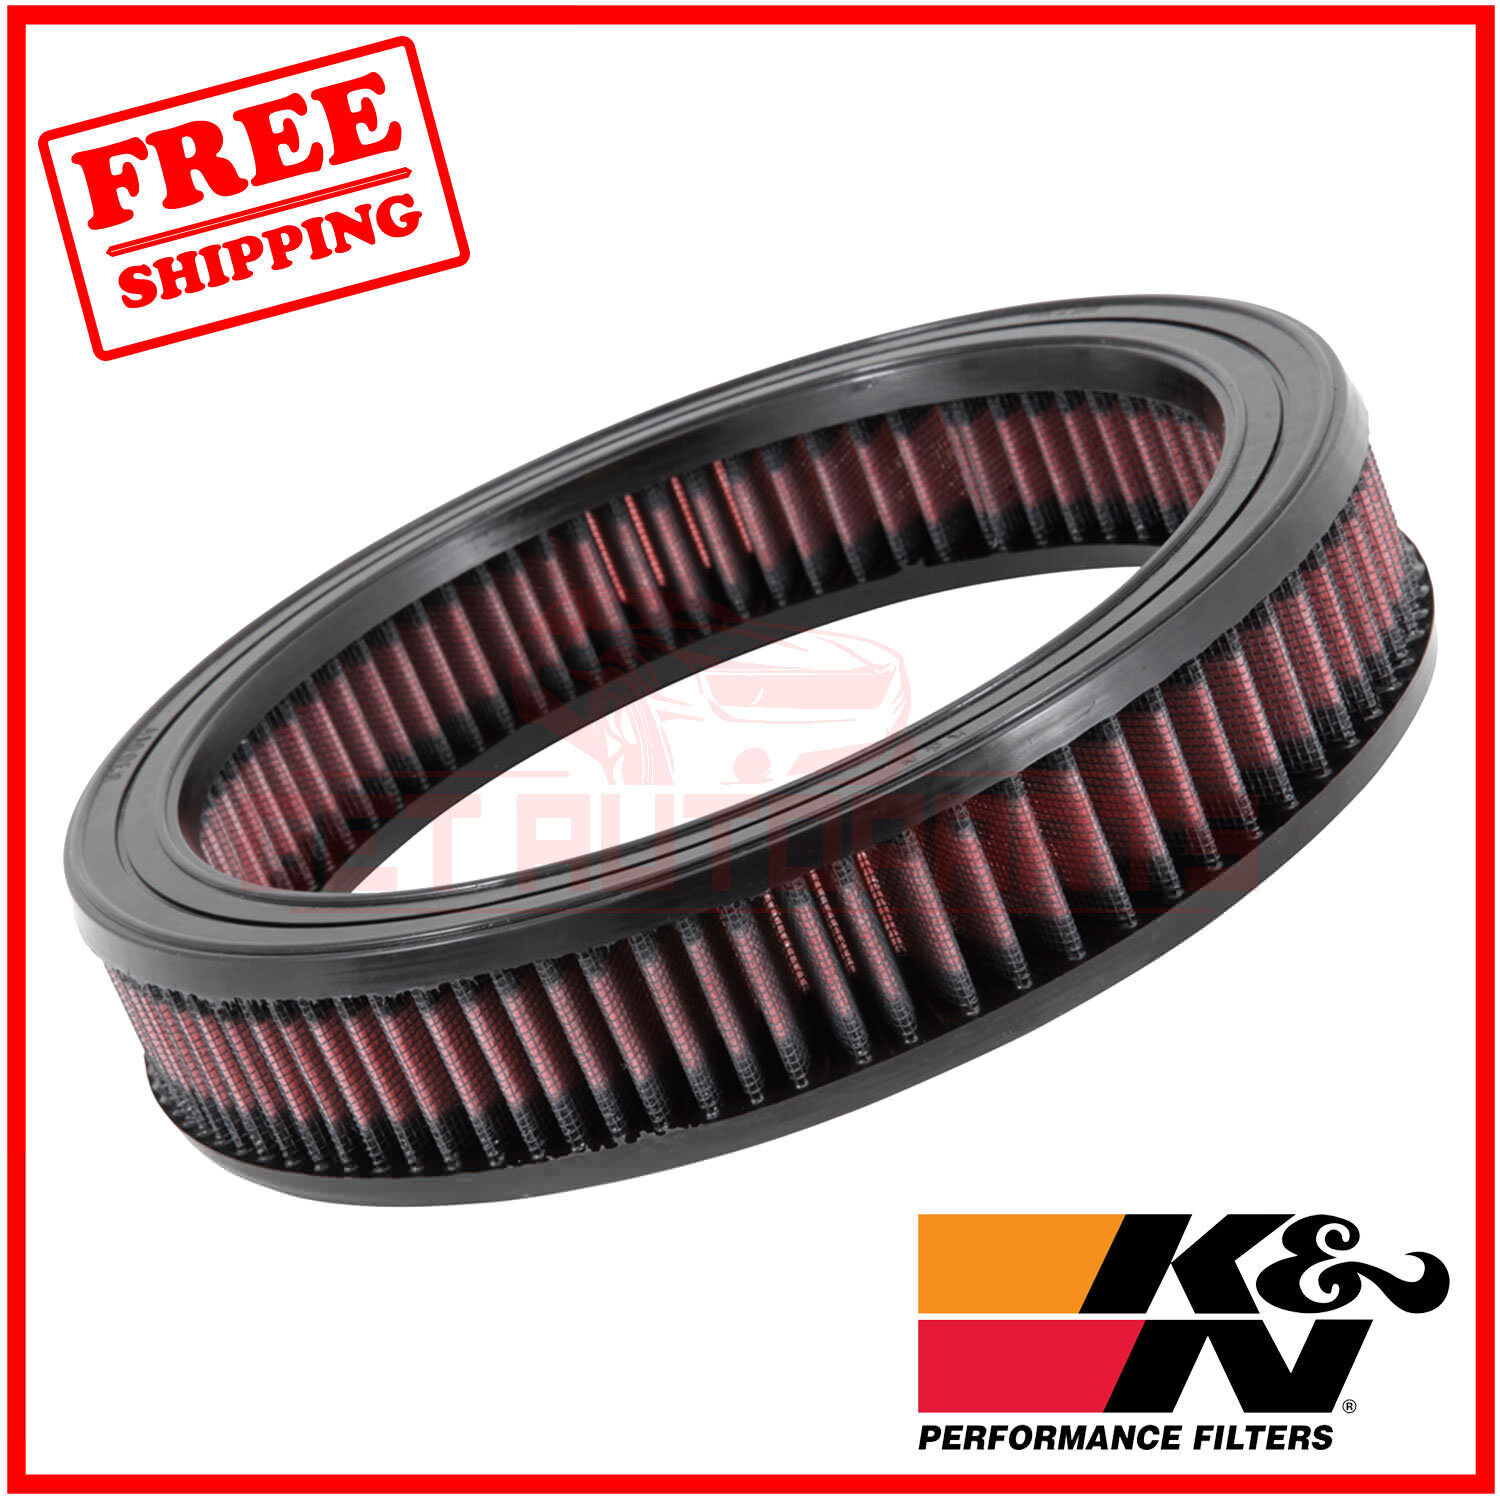 K&N Replacement Air Filter for Chevrolet C30 Pickup 1962-1974